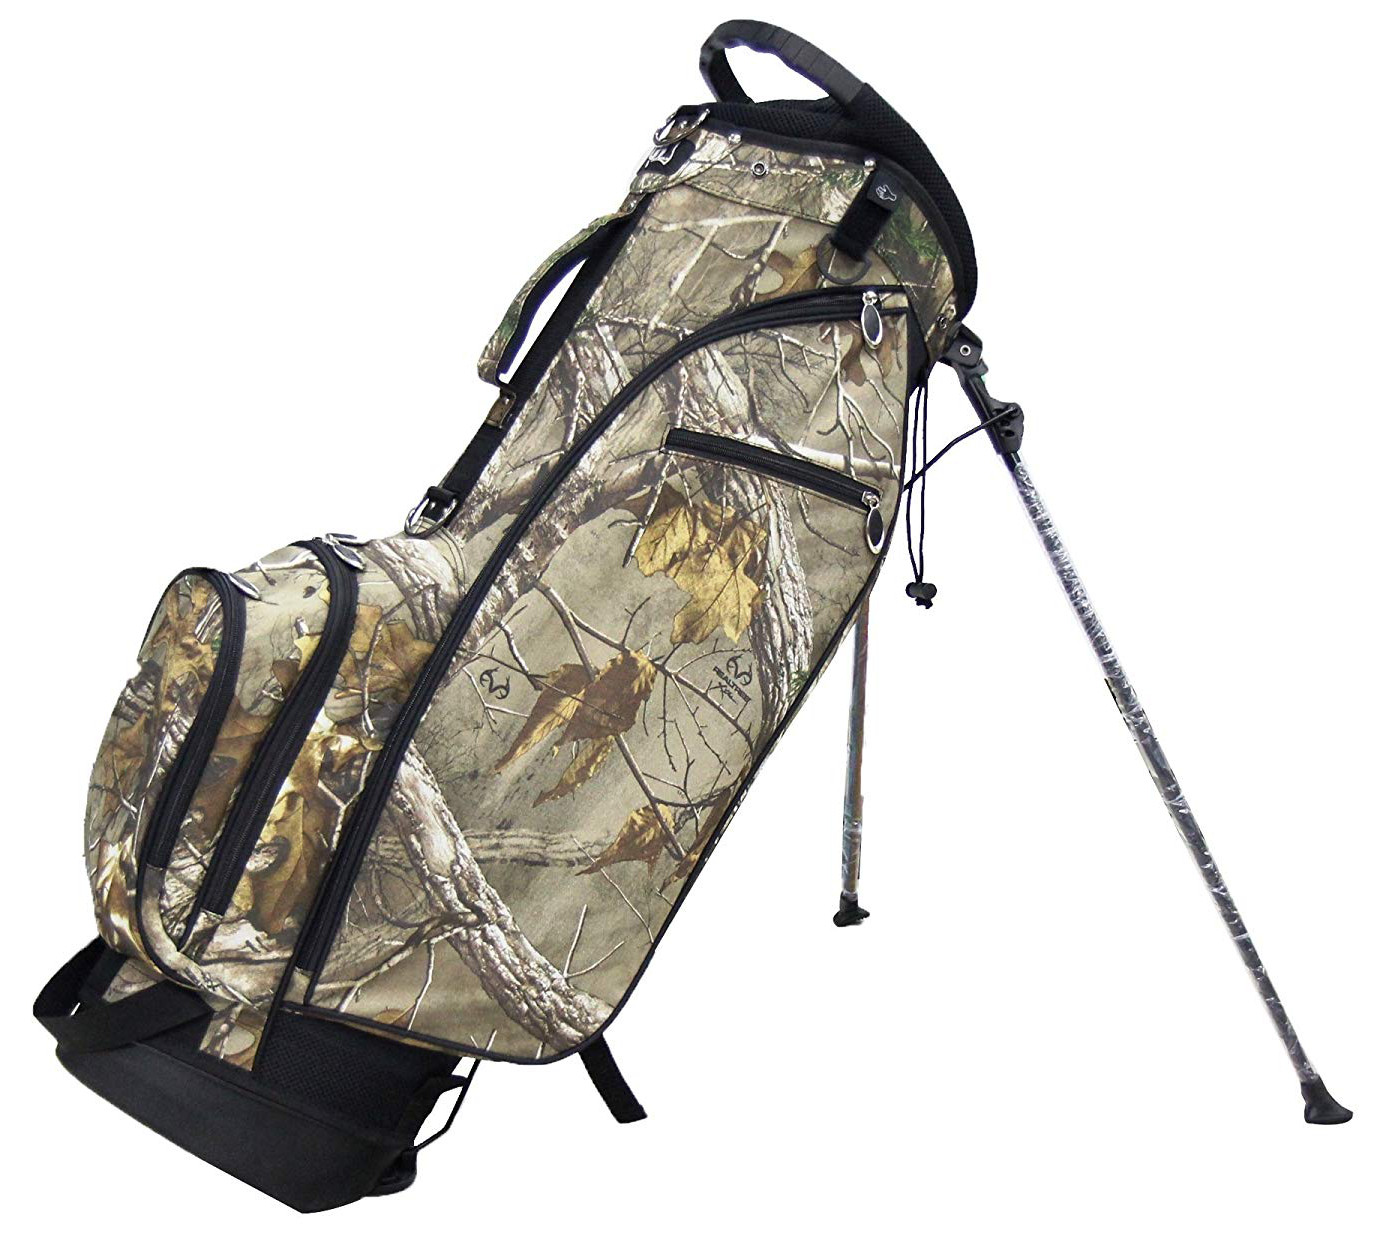 RJ Sports Camo Flash X18 Deluxe Golf Stand Bags